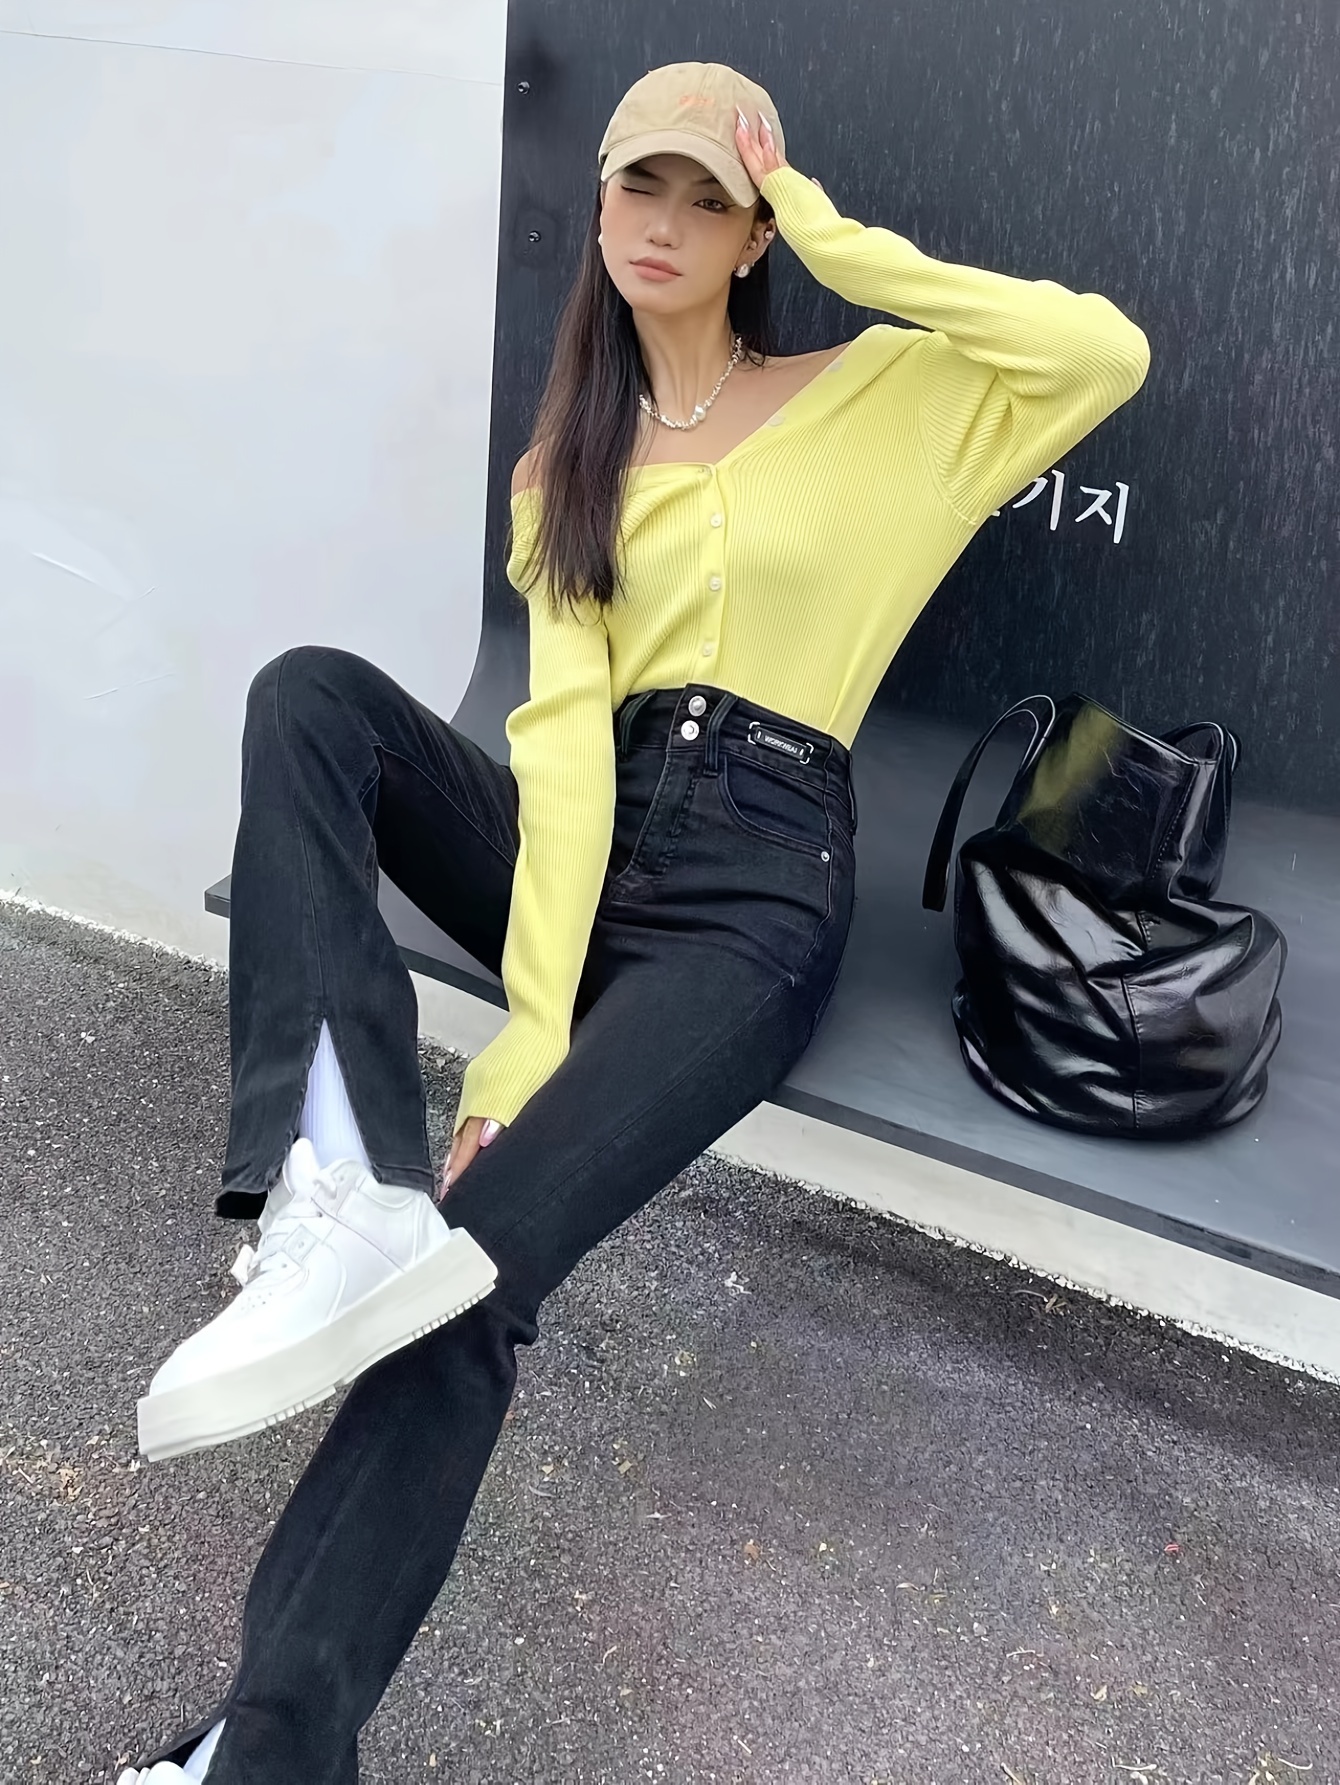 Double Button Pants - Yellow